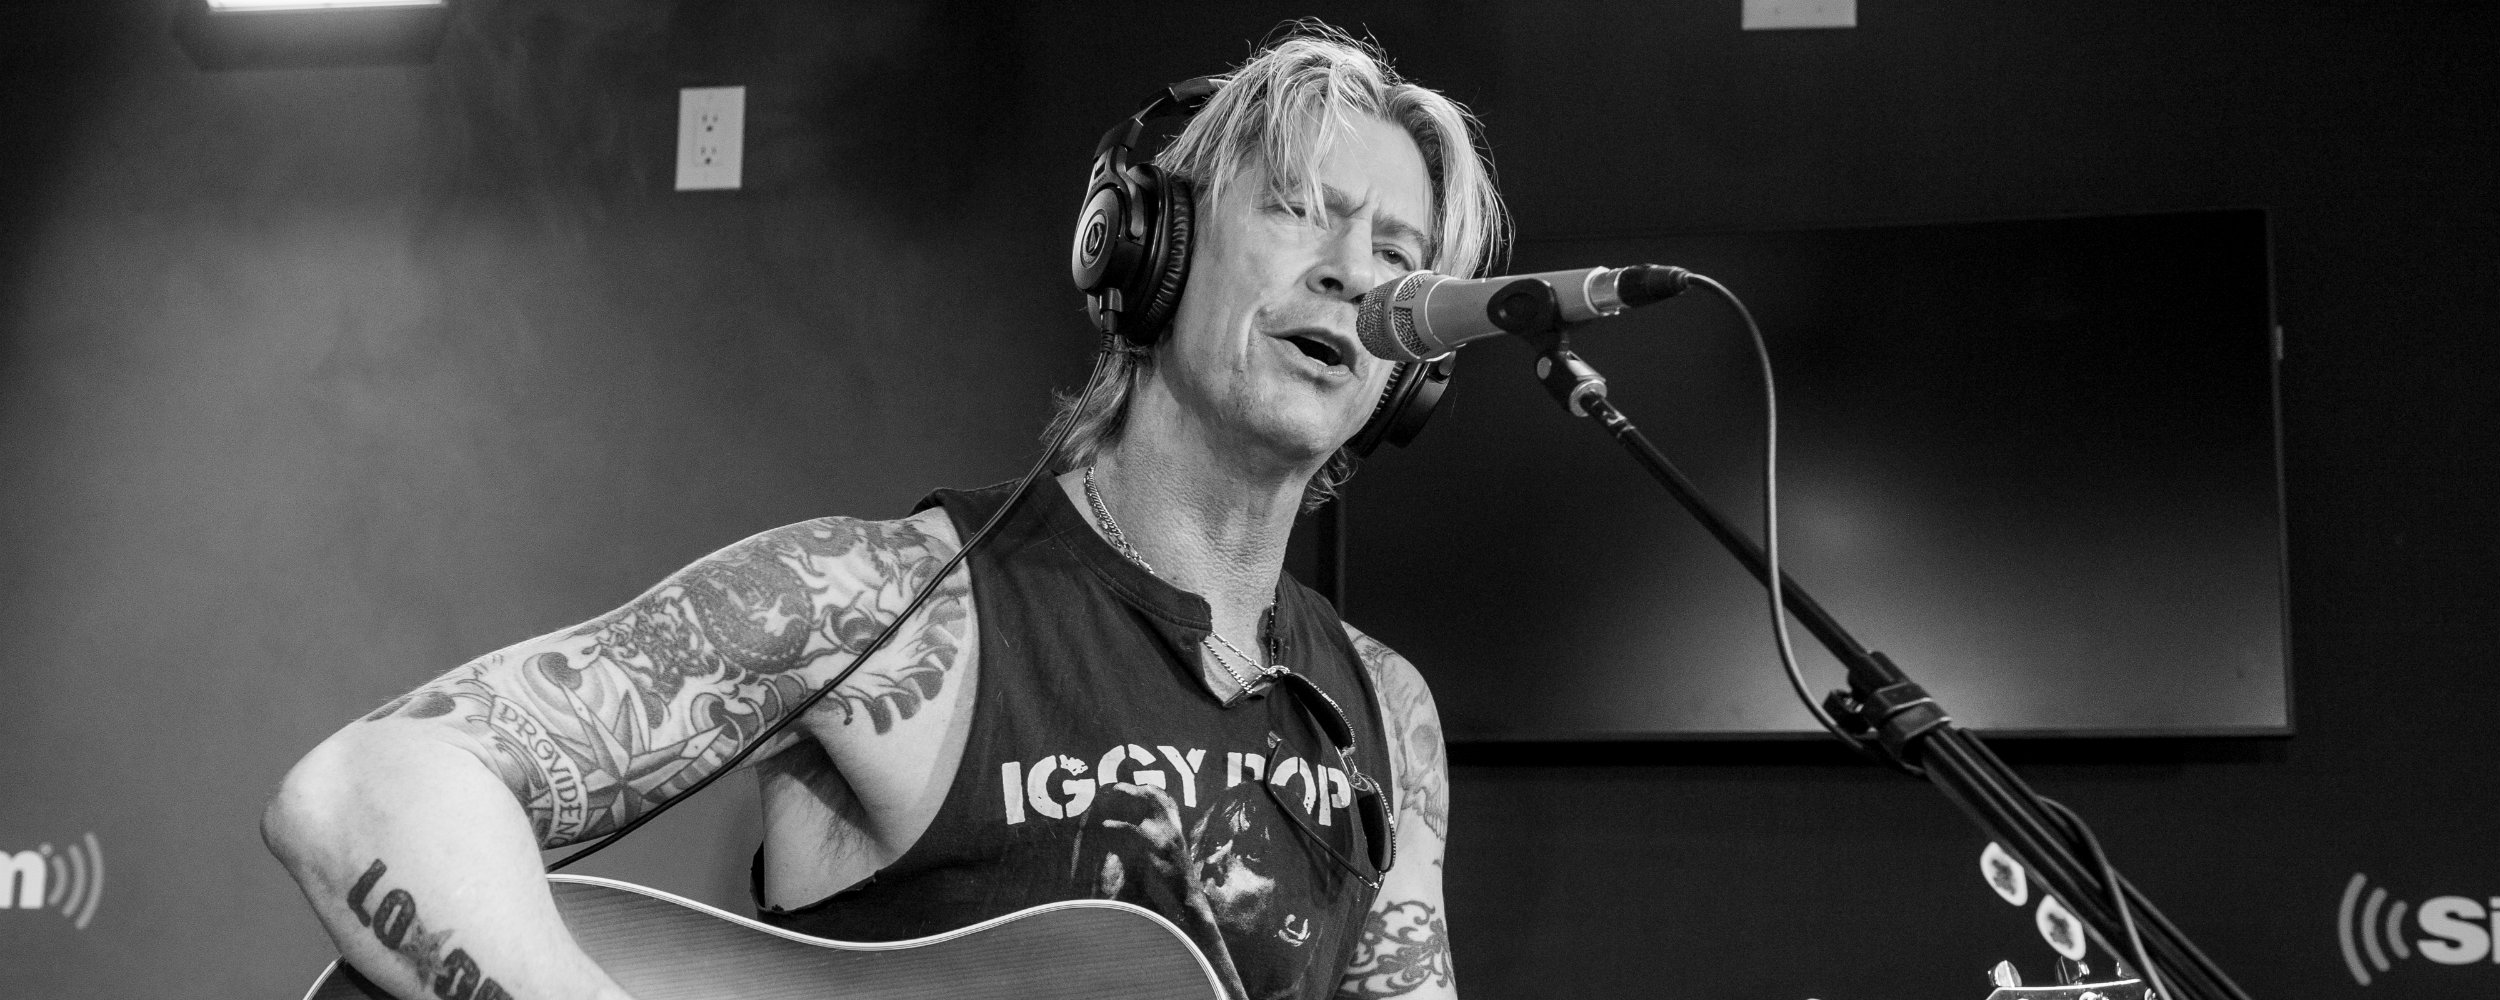 Duff McKagan Talks Punk Rock, Cable News, and The Election in New Interview